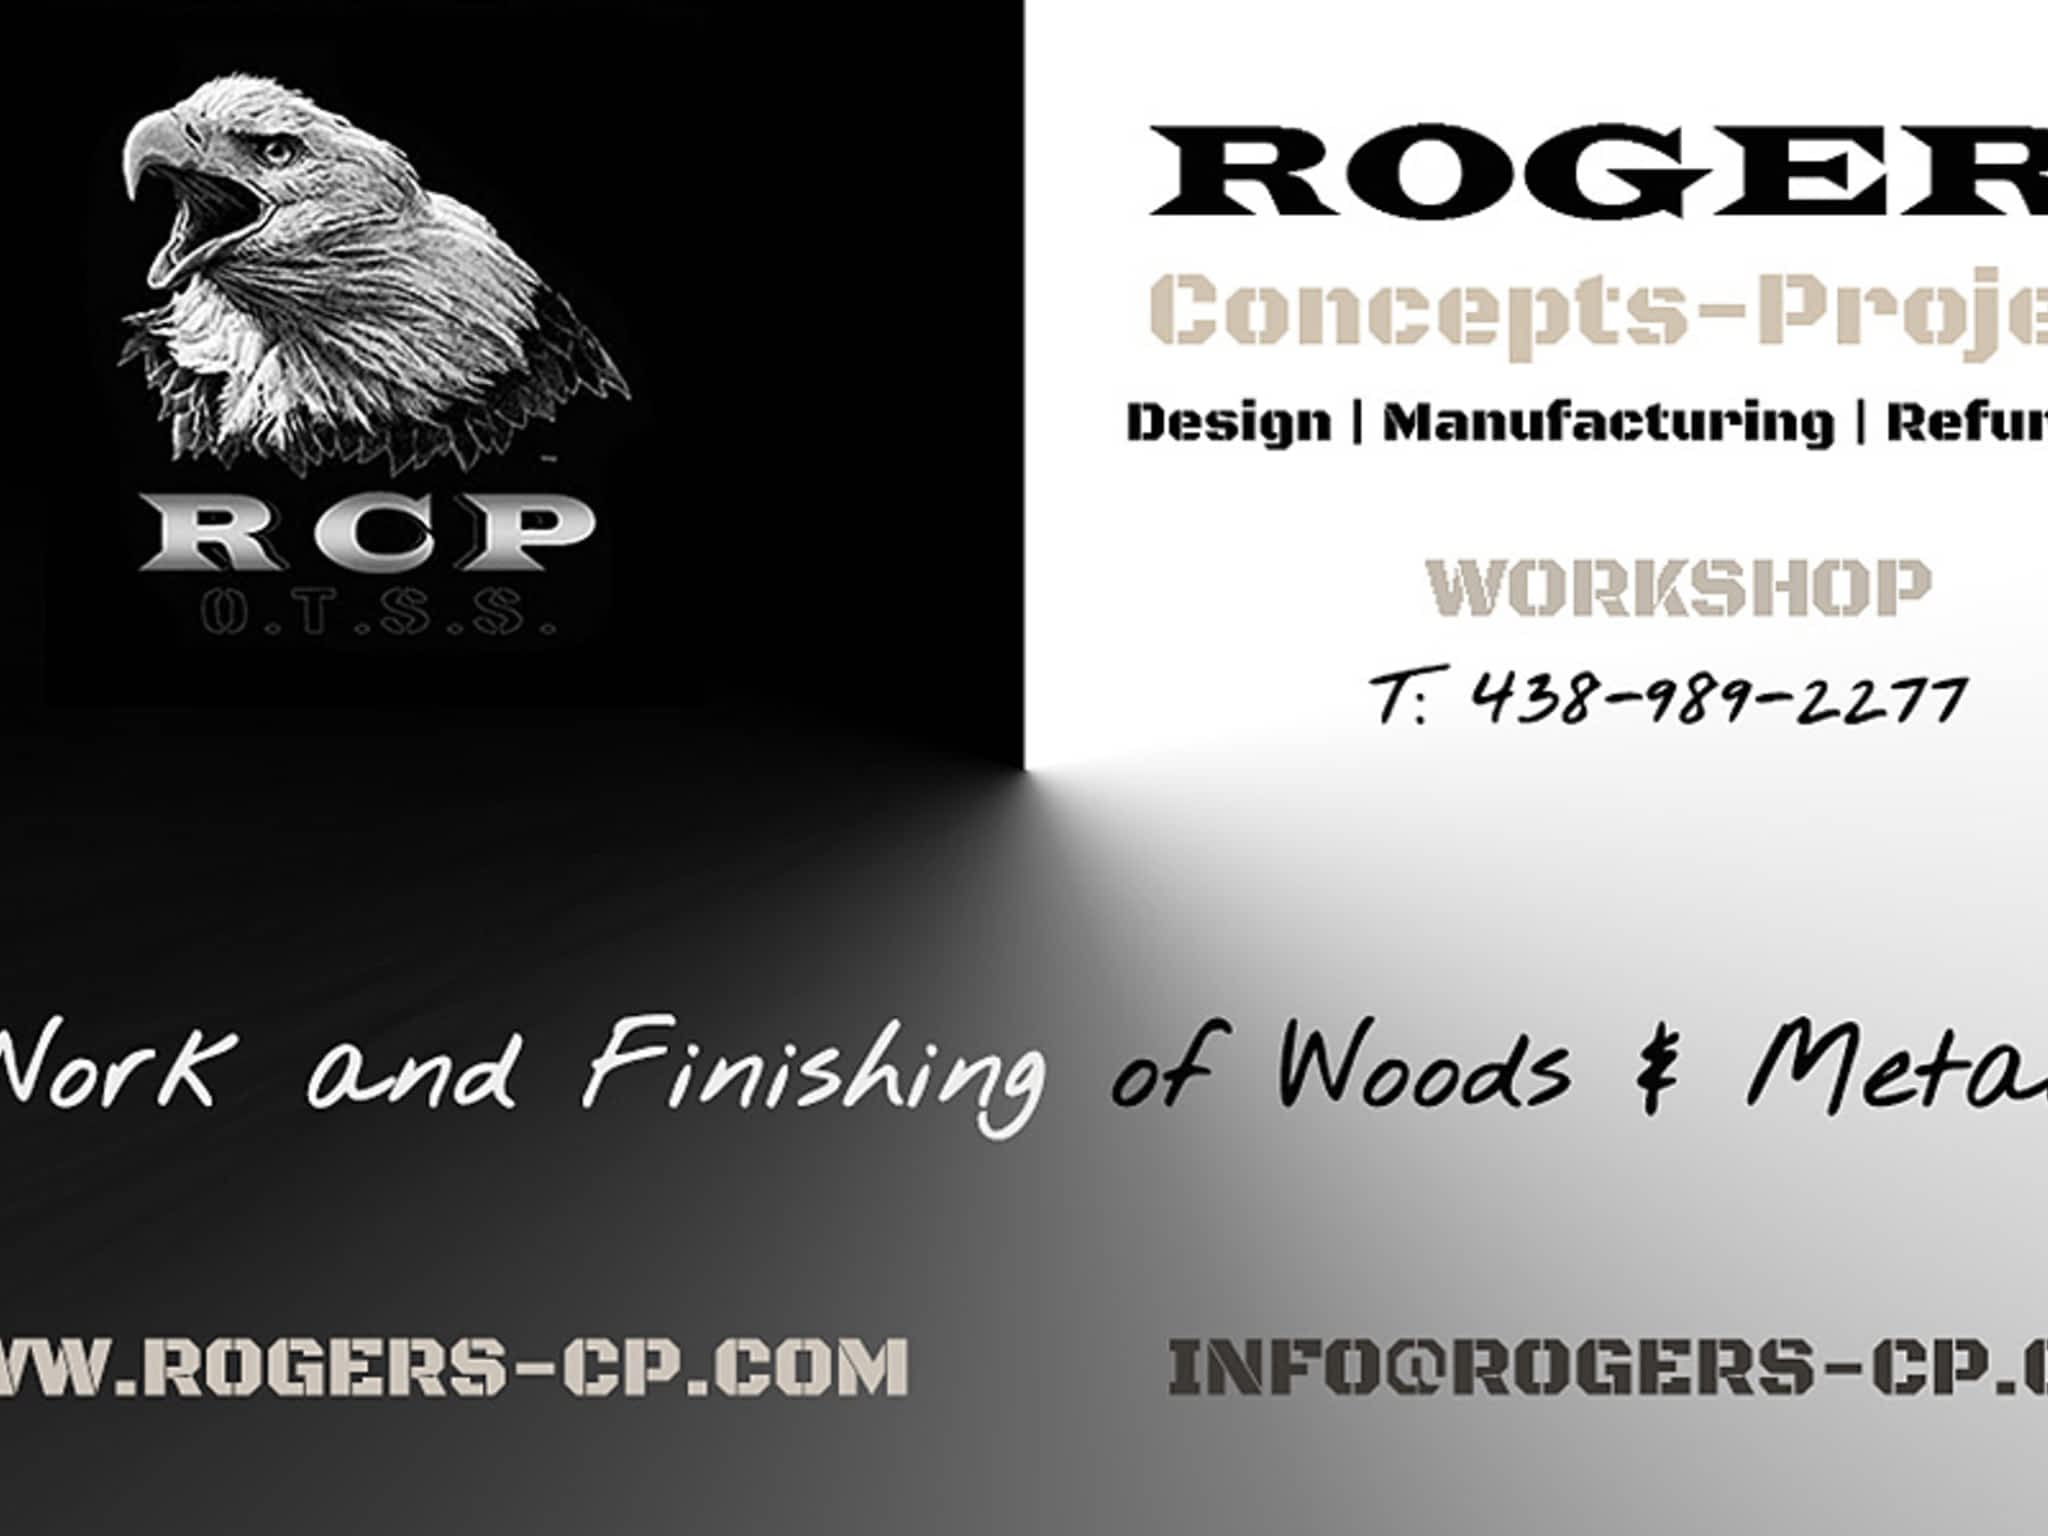 photo ROGERS Concepts-Projets | Atelier